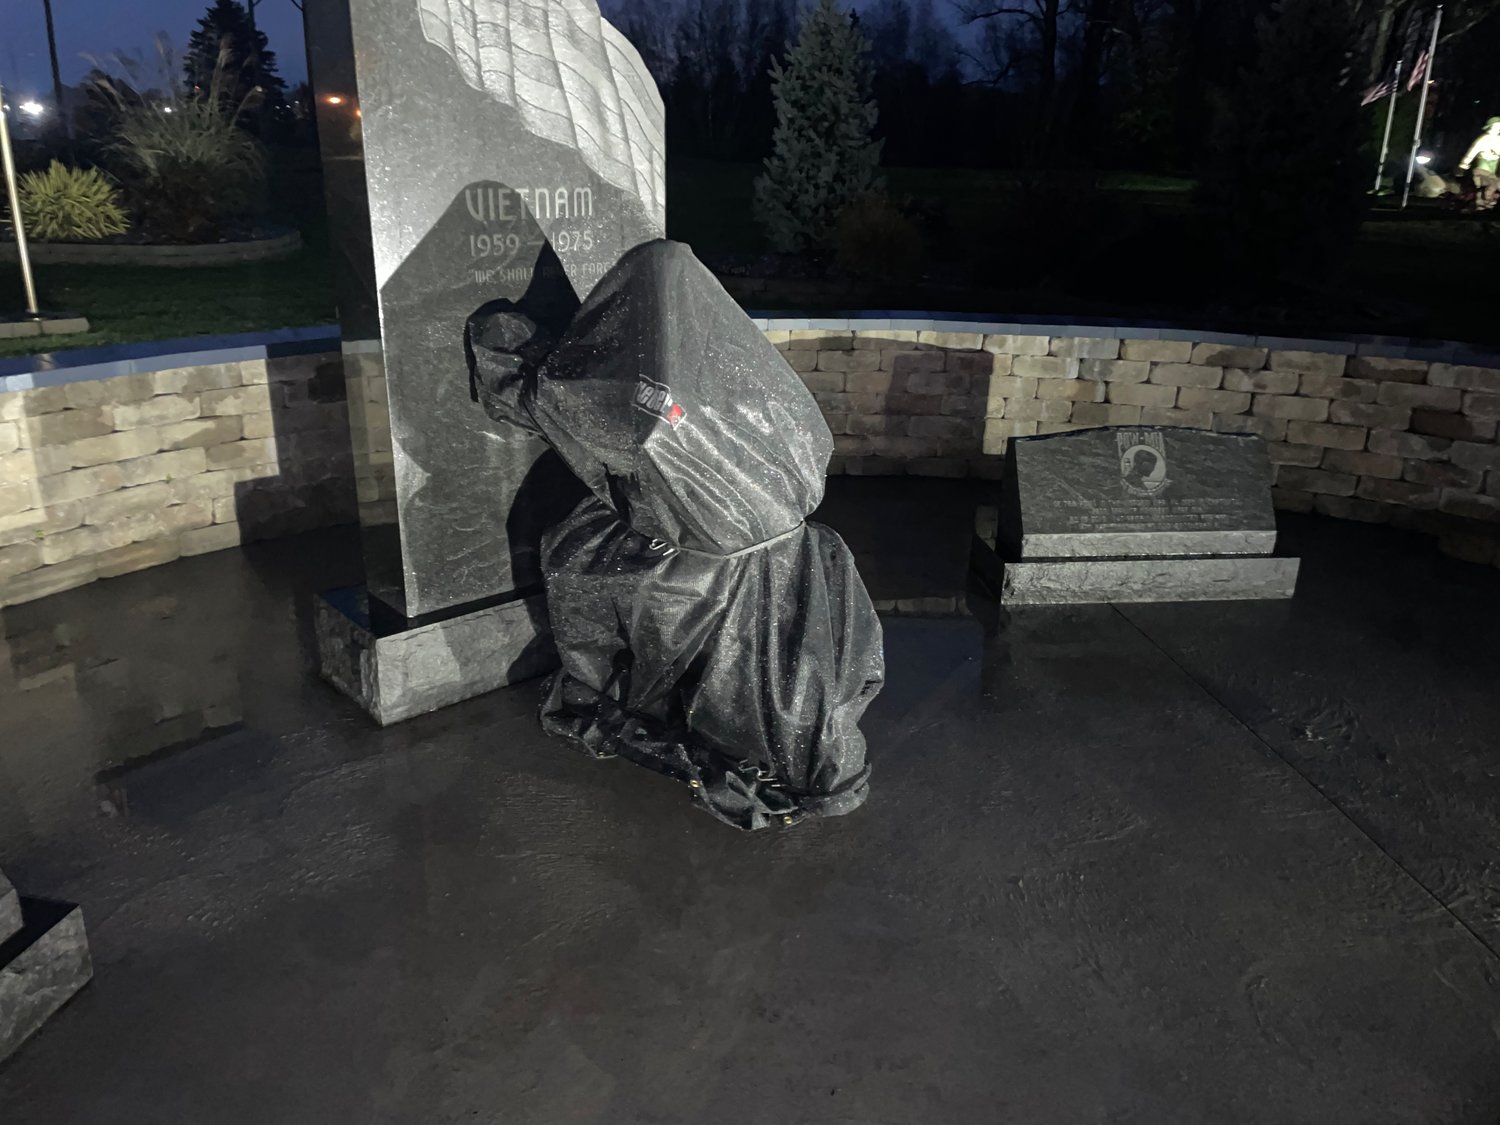 READY FOR REVEAL – Local officials with the Vietnam Veterans Memorial on the Griffiss Business and Technology Park have a new item under wraps and ready to unveil and dedicate during its Veterans Day observance on Thursday, Nov. 11, at 2 p.m. The Vietnam Veterans Memorial can be found on Griffiss Park near the intersection of Route 825n (also known as Hill Road) and Ellsworth Road. For additional information about the observance, visit the Vietnam Veterans Memorial page on Facebook.